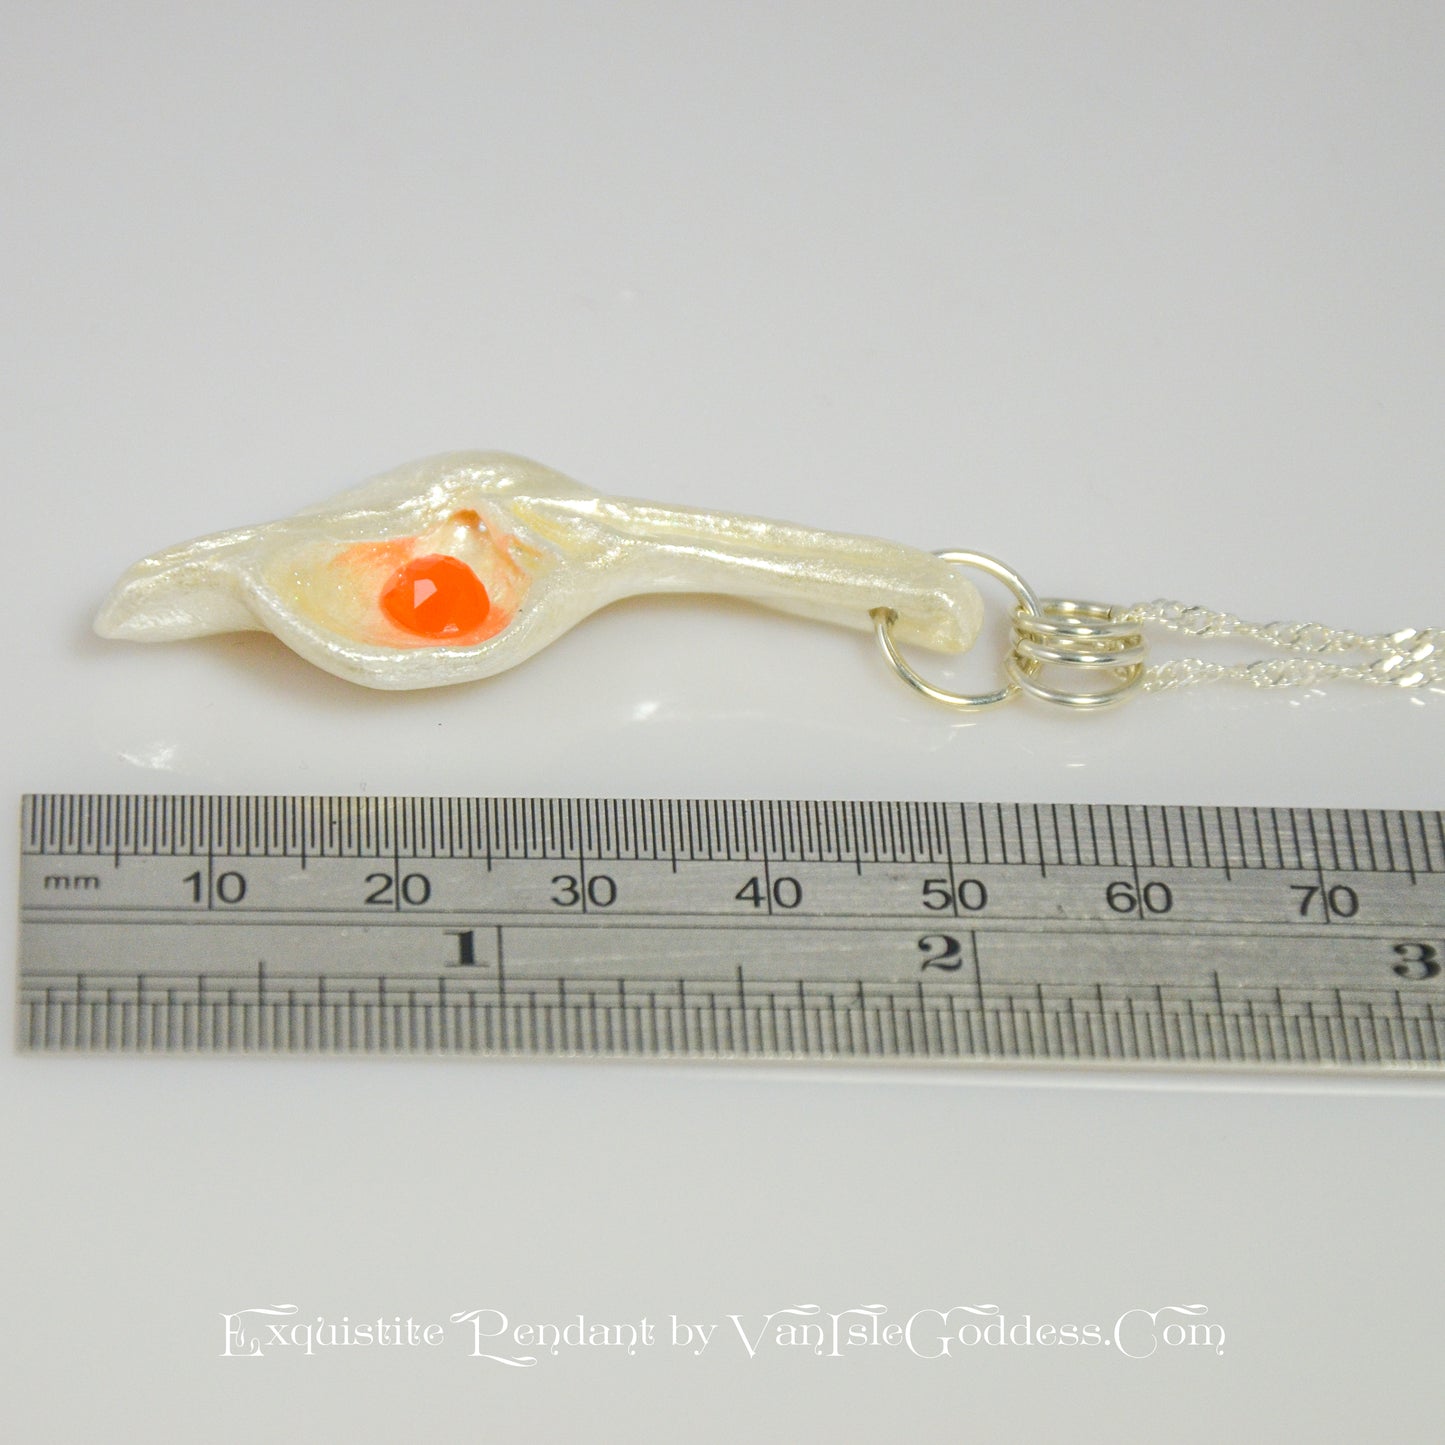 Natural Seashell pendant, elevating the beautiful natural nuances to new heights. The pendant is perfectly adorned with a mesmerizing rose cut Carnelian gemstone. The pendant is laying flat on a table top with a ruler so the viewer can see the length of the pendant.